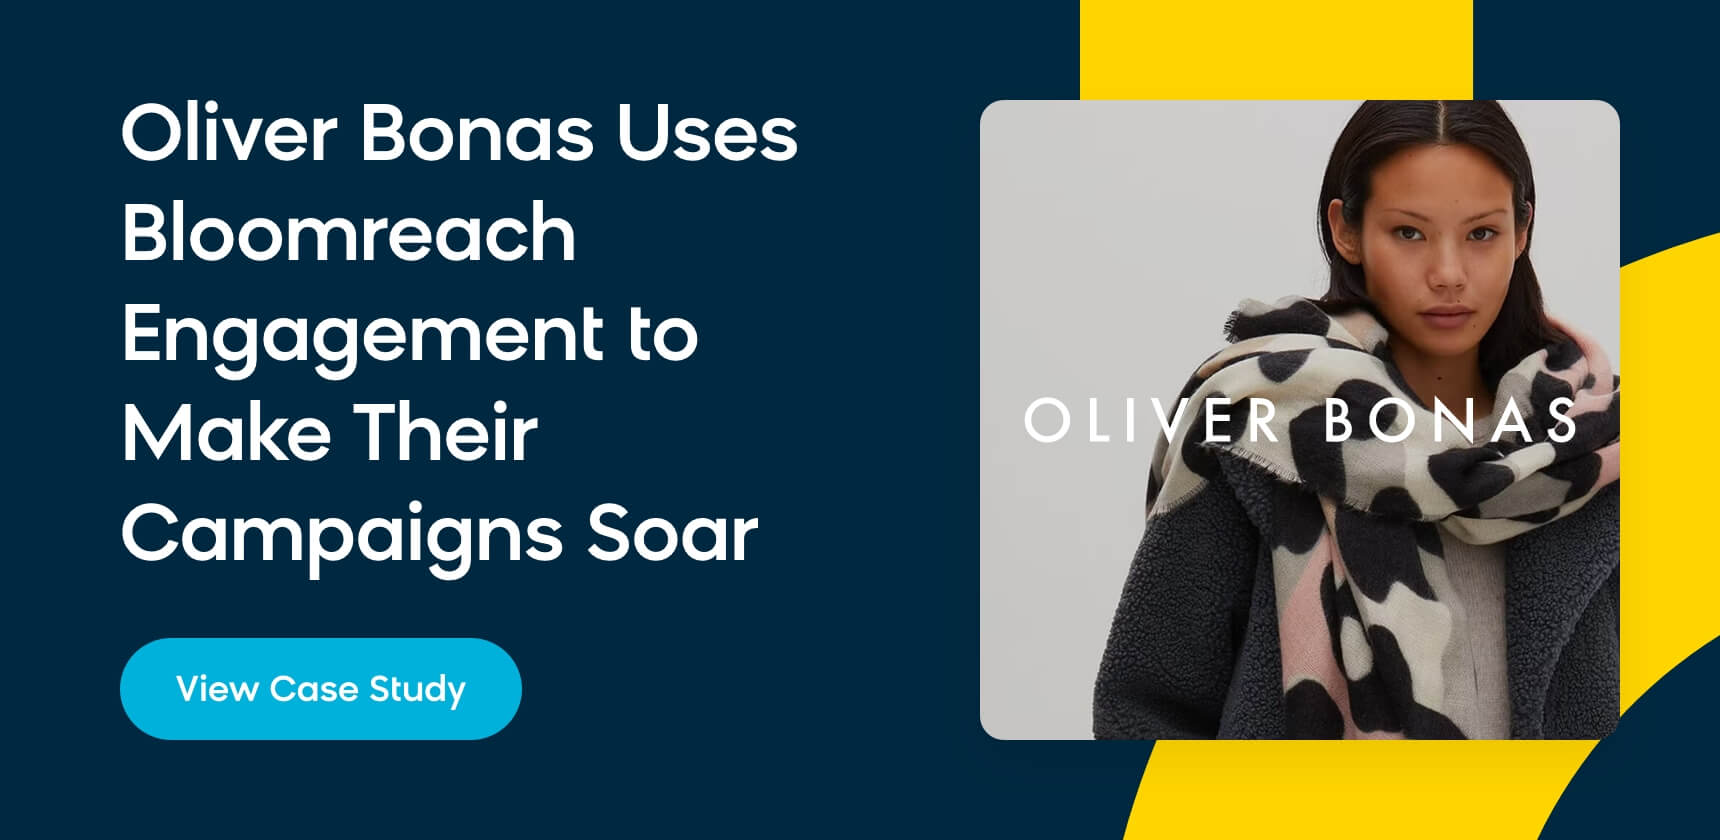 Oliver Bonas case study with Bloomreach